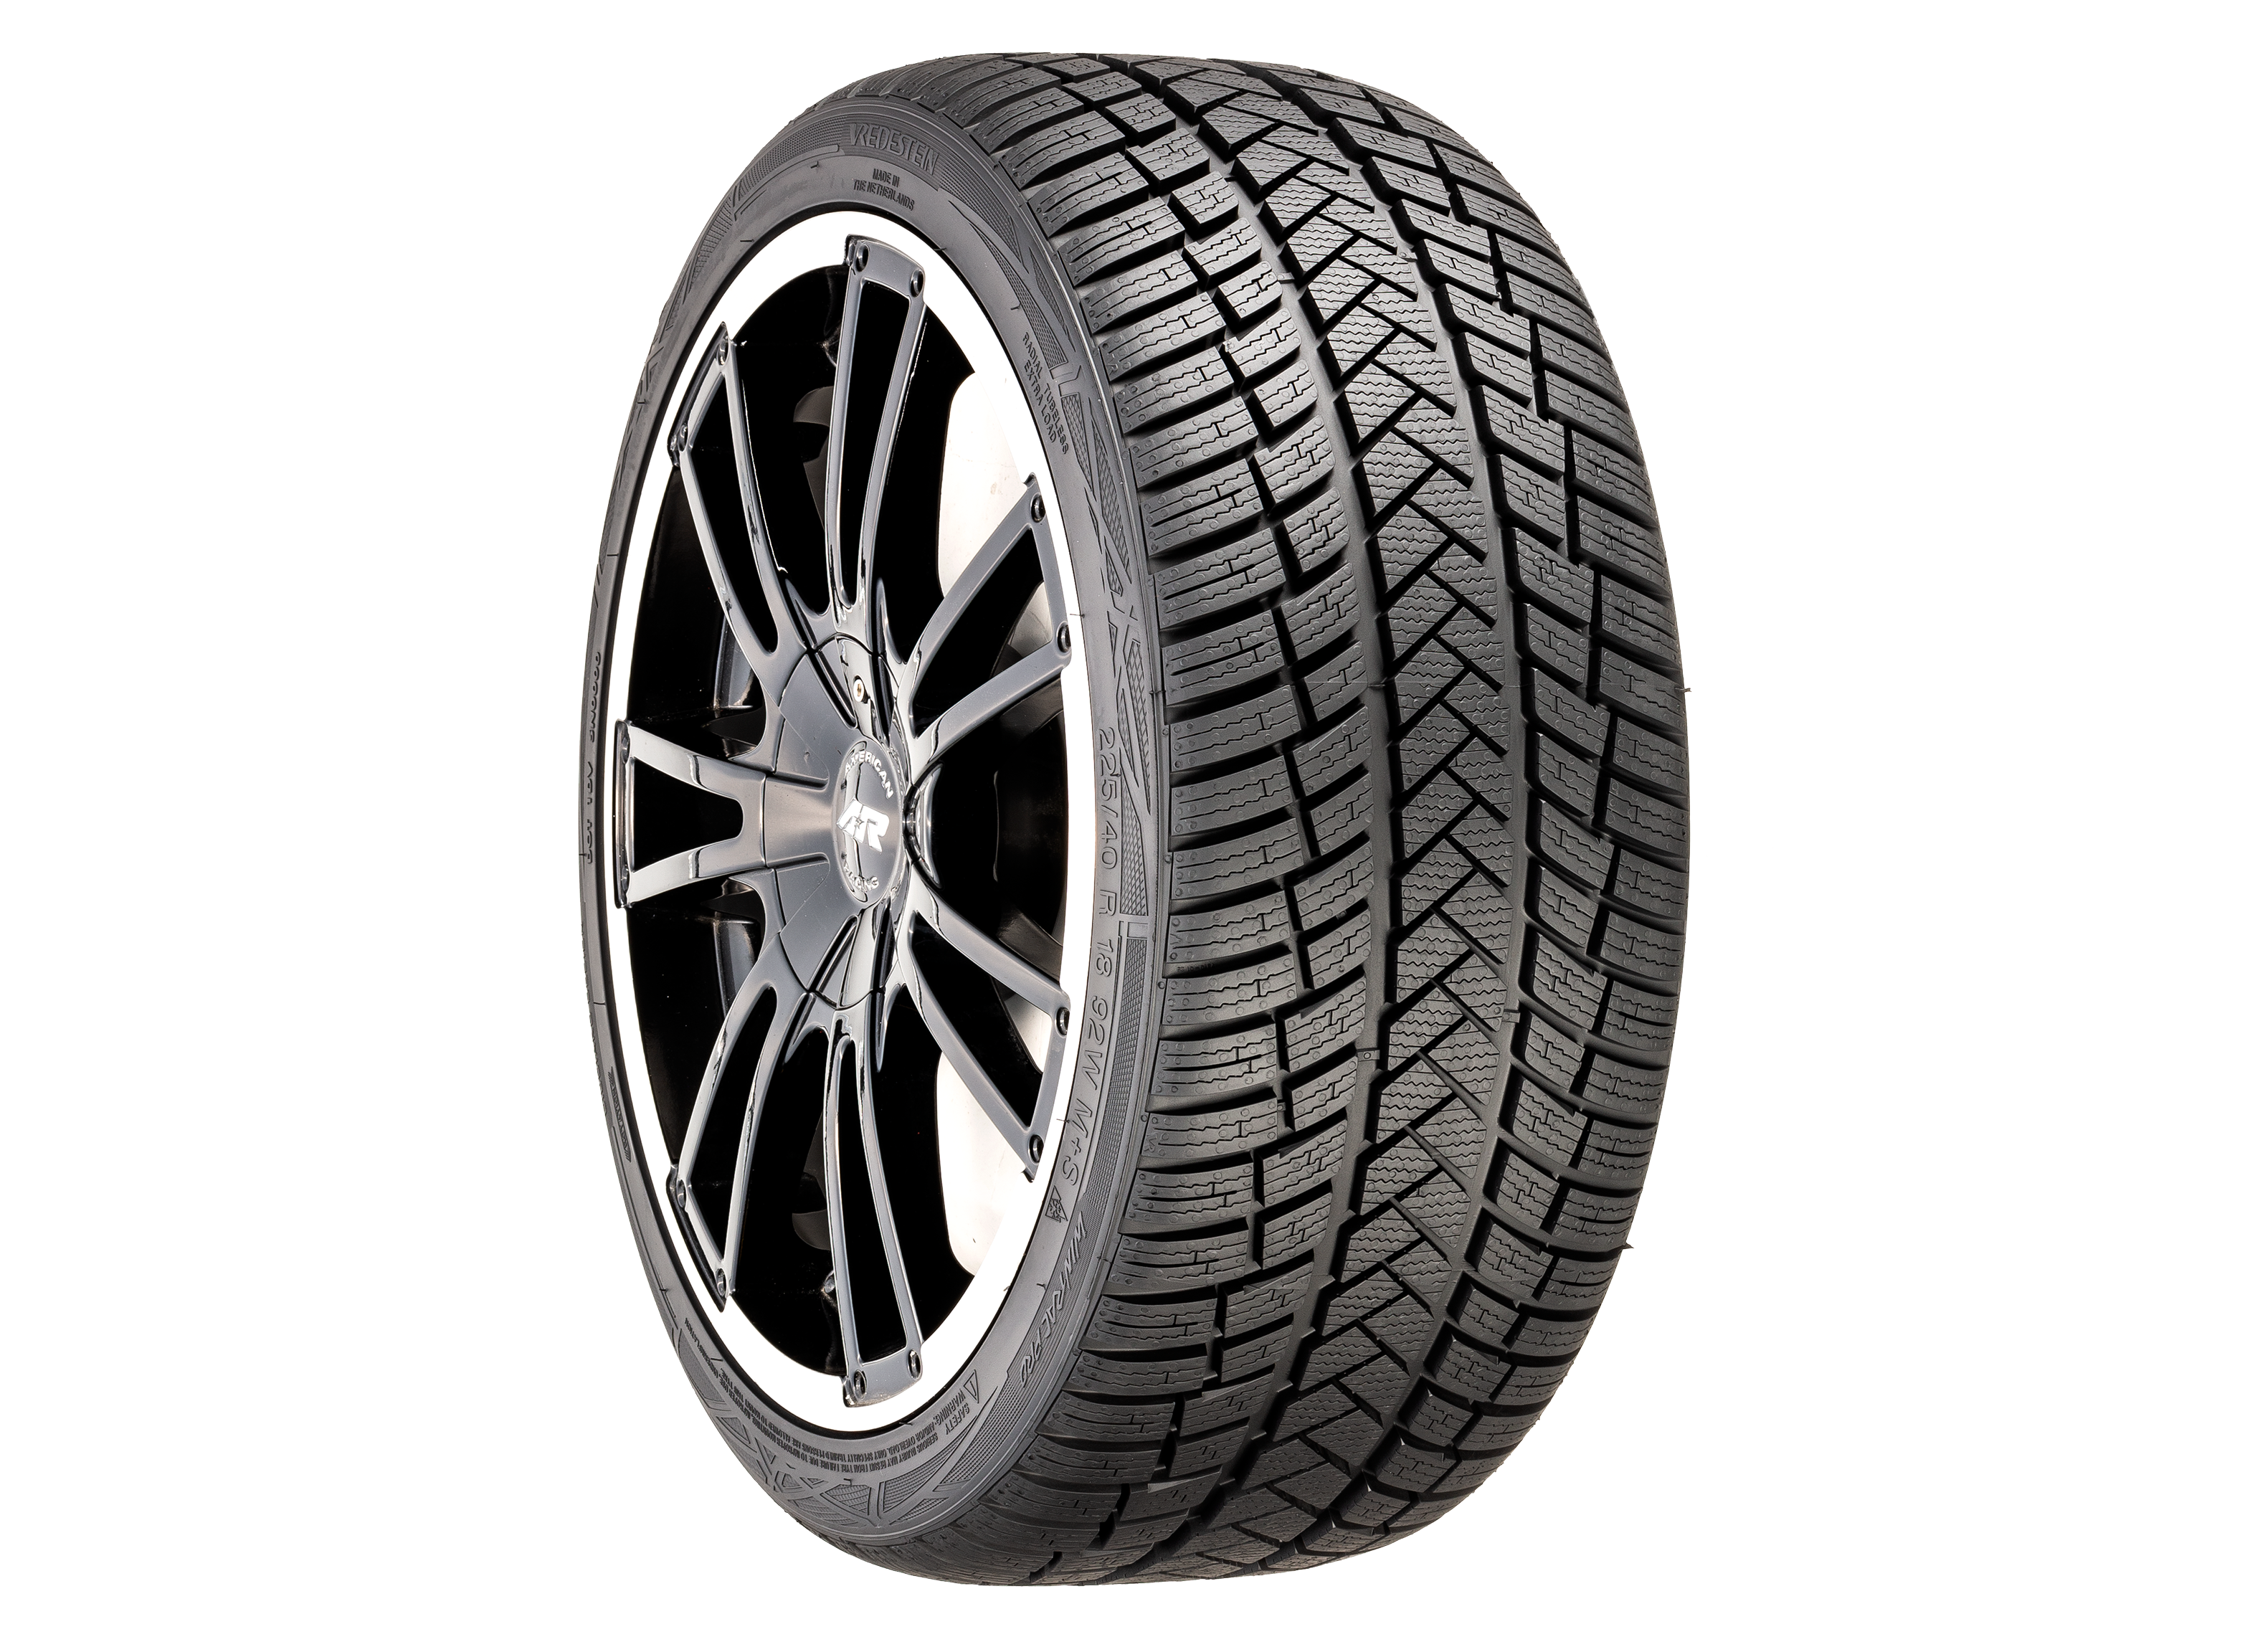 Vredestein Wintrac Pro - Review Tire Consumer Reports